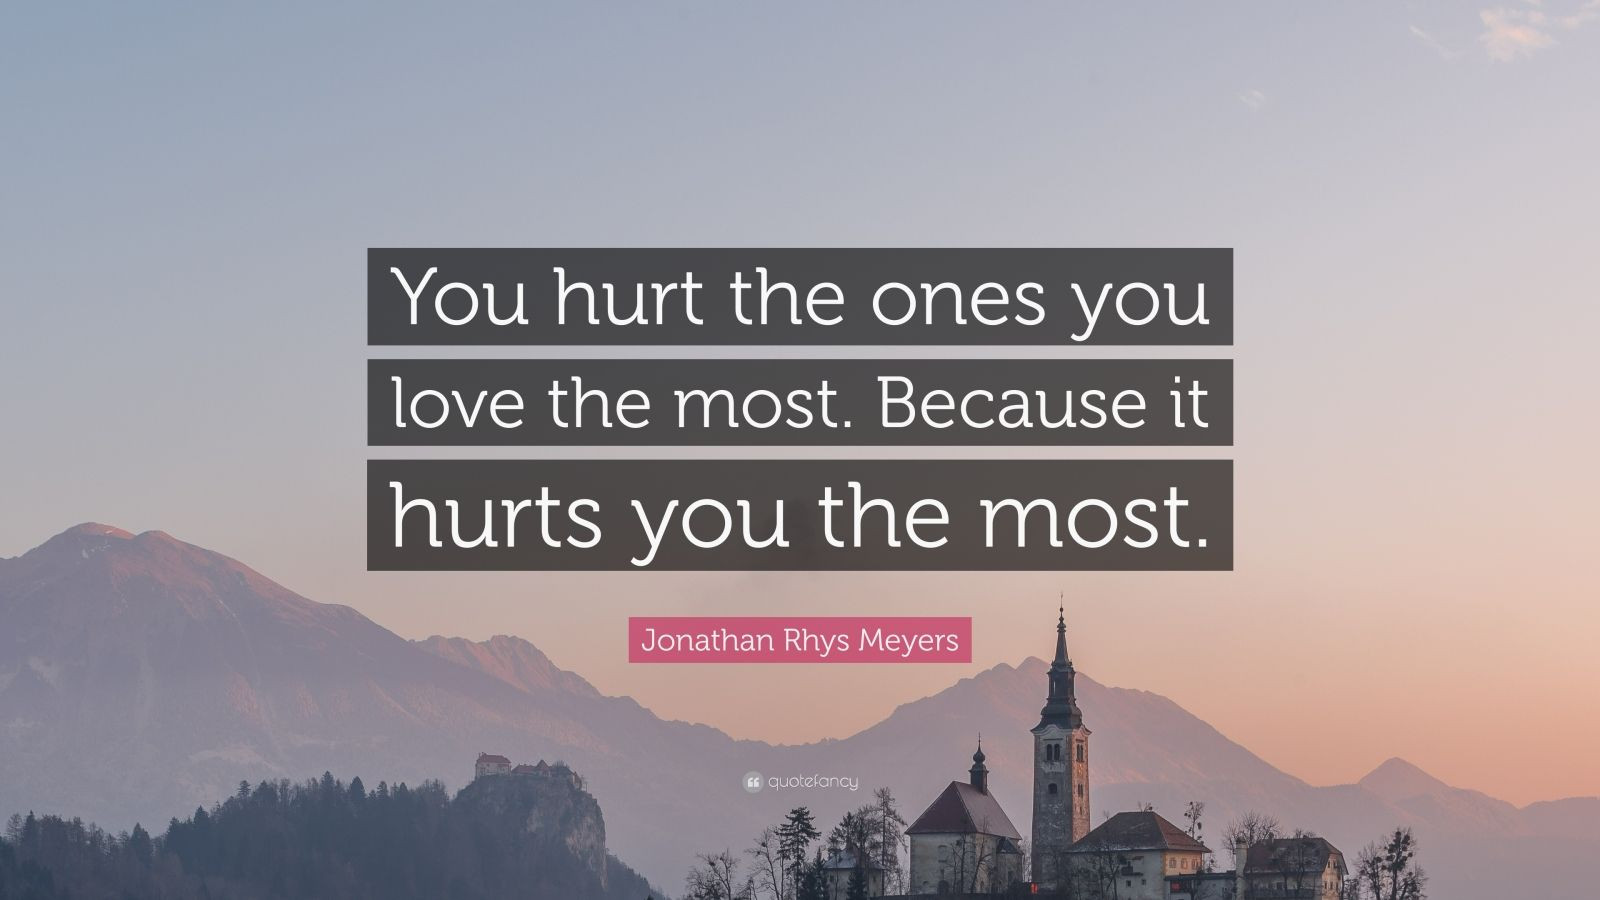 Quotes For The One You Love
 Jonathan Rhys Meyers Quote “You hurt the ones you love